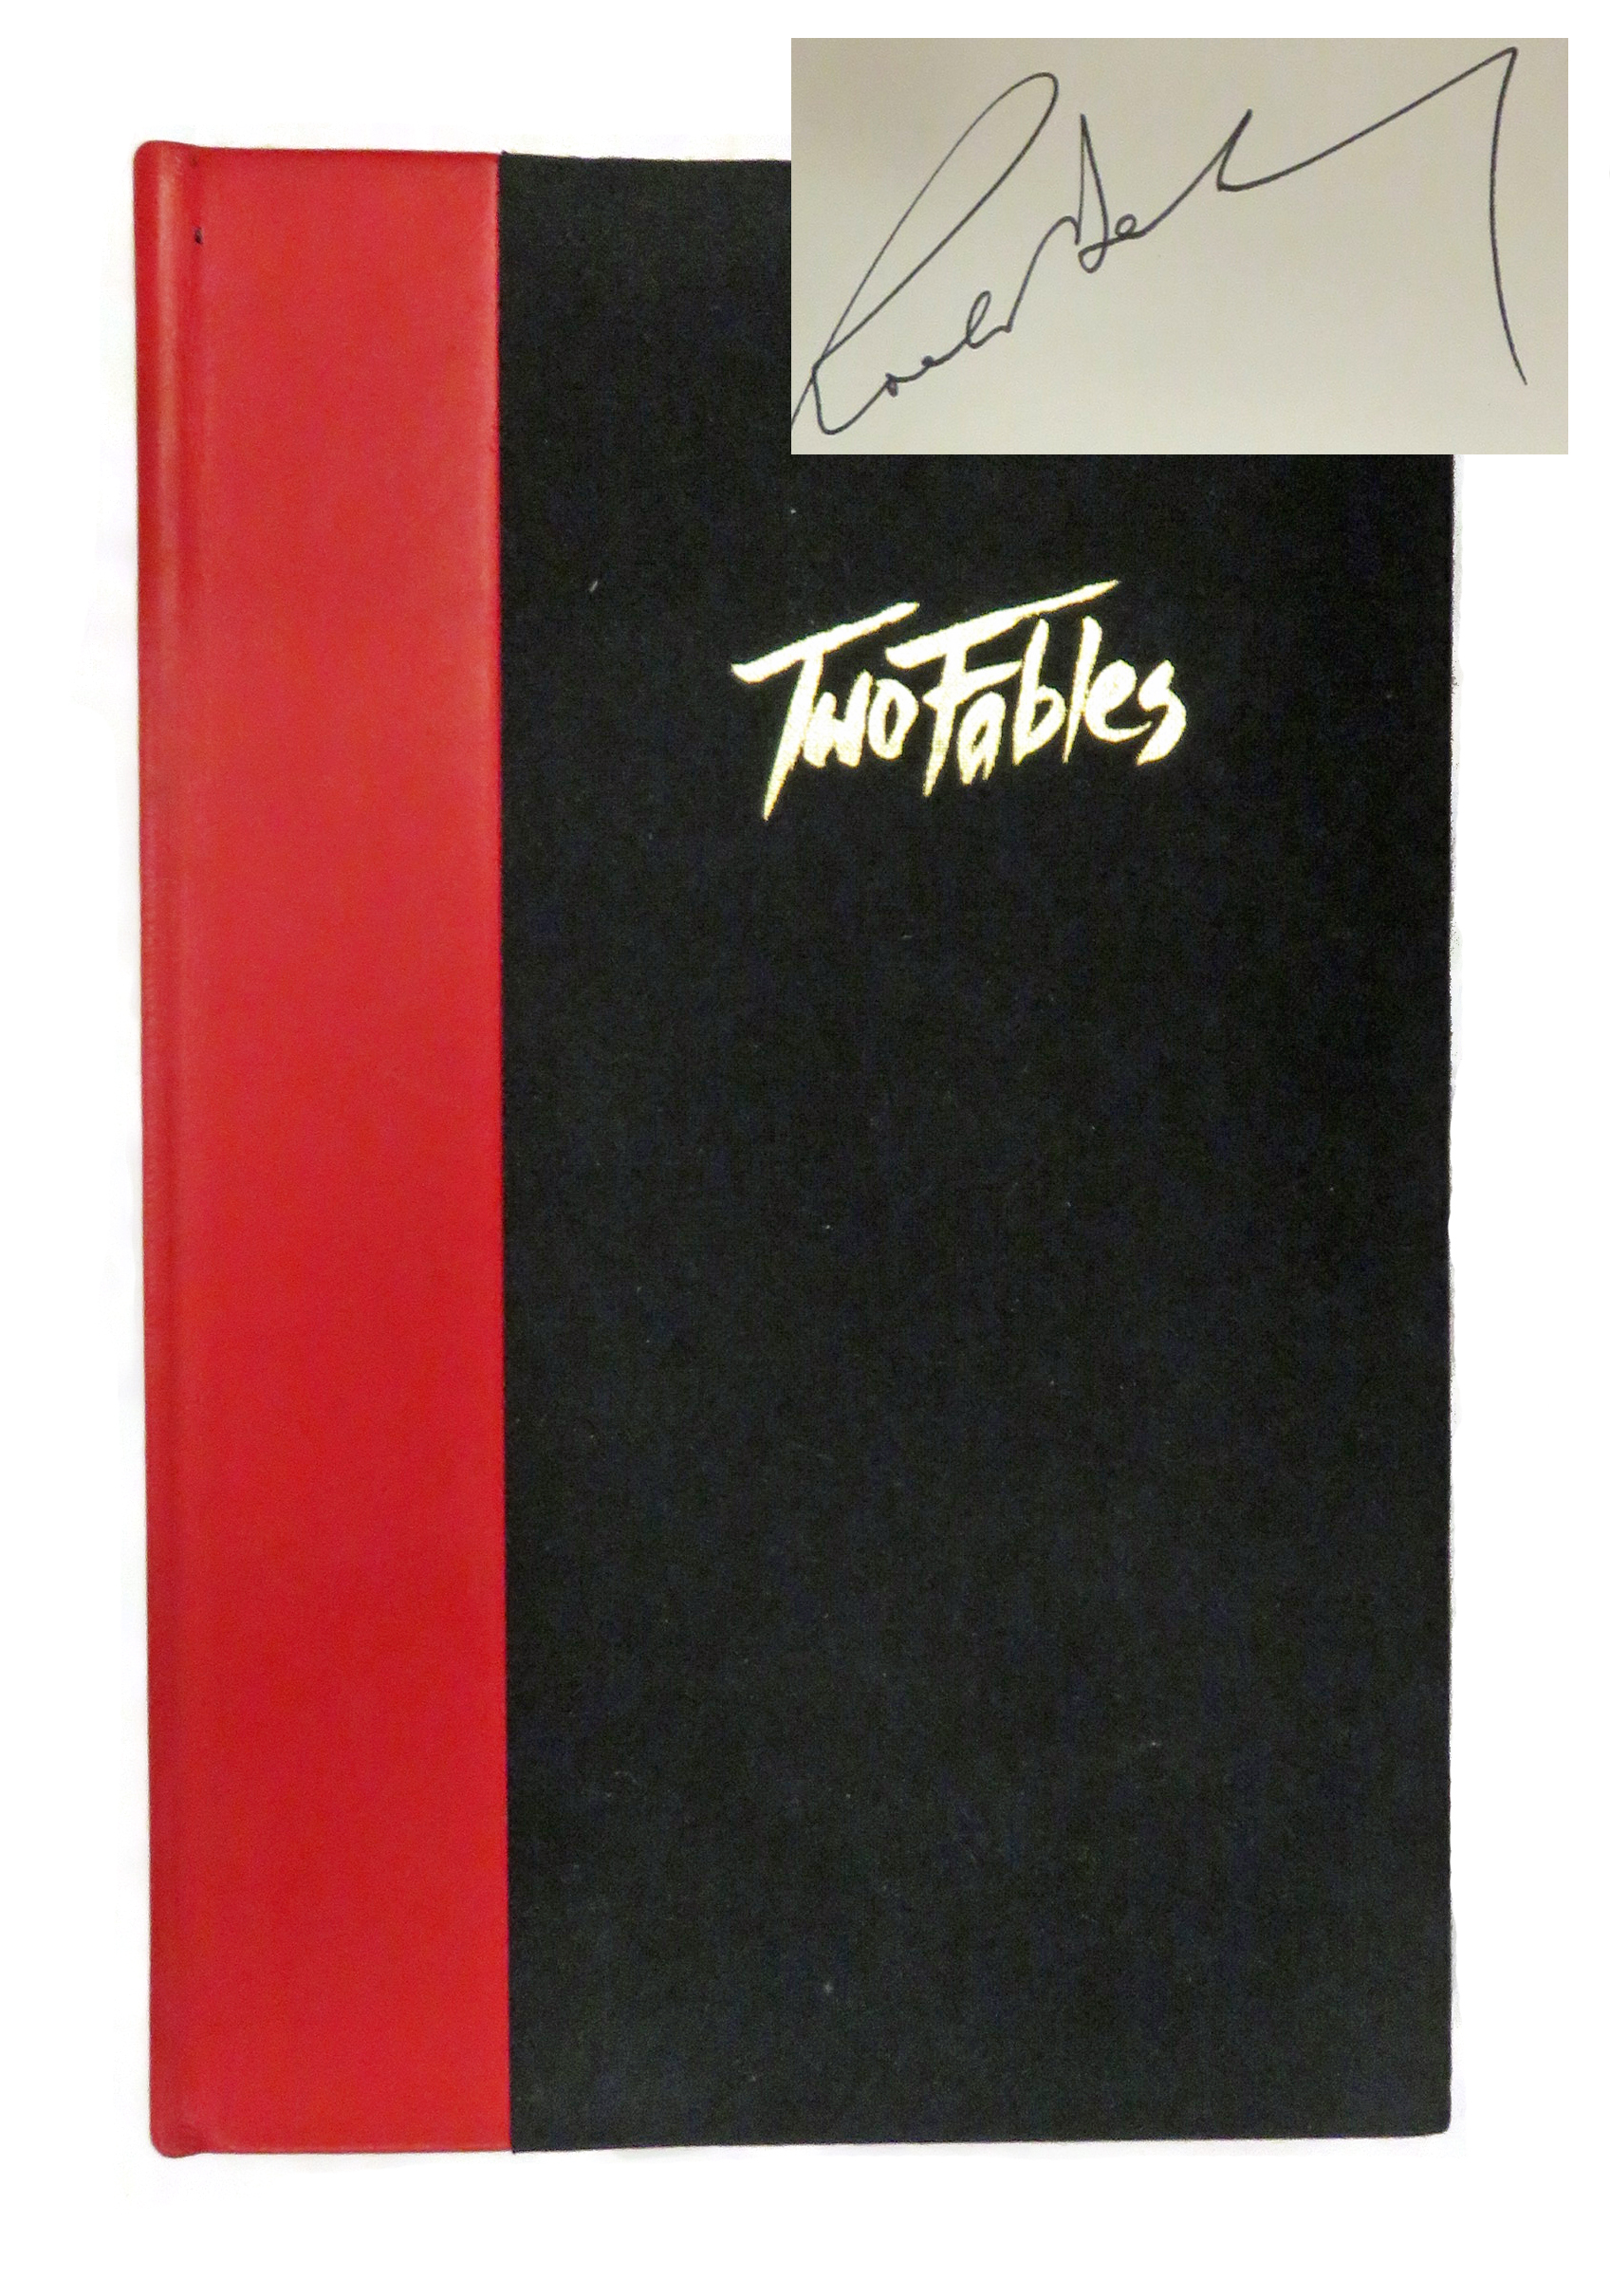 Two Fables SIGNED by Roald Dahl